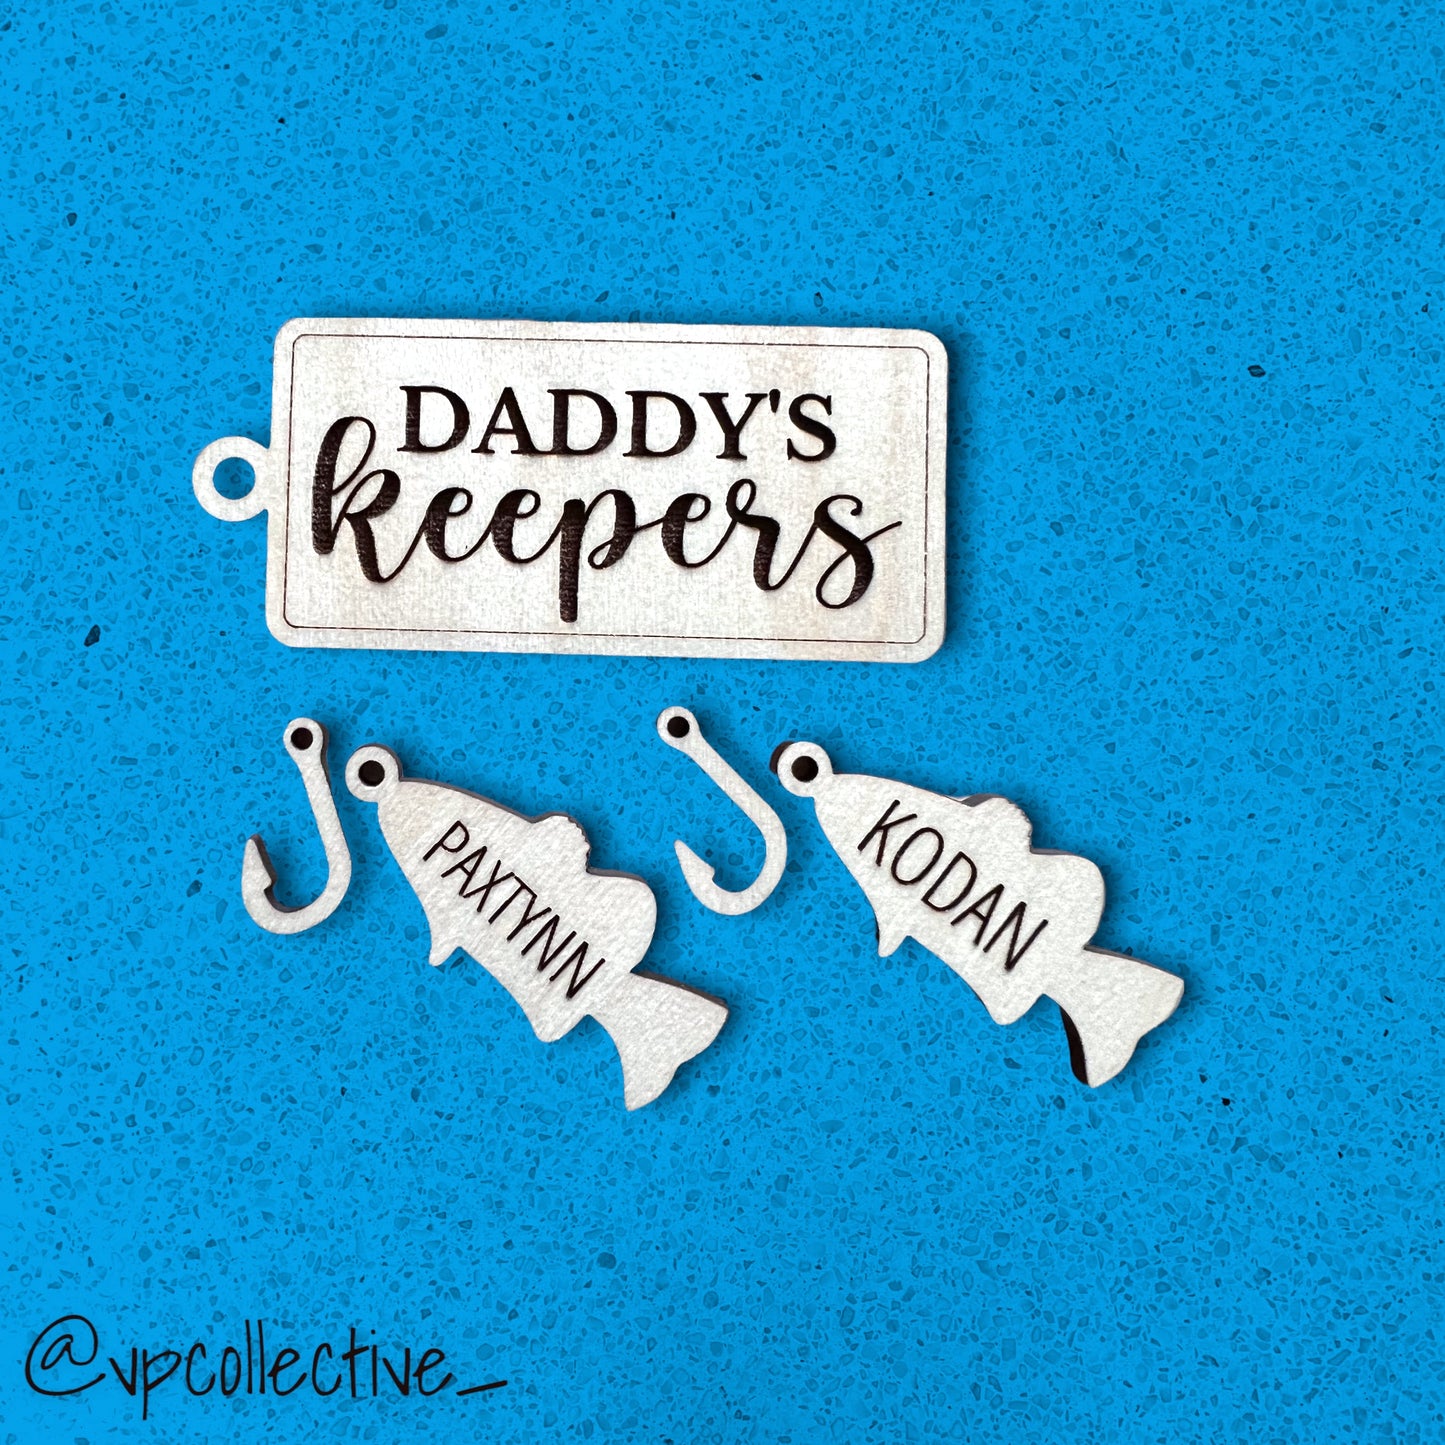 Daddy’s Keepers Keychain